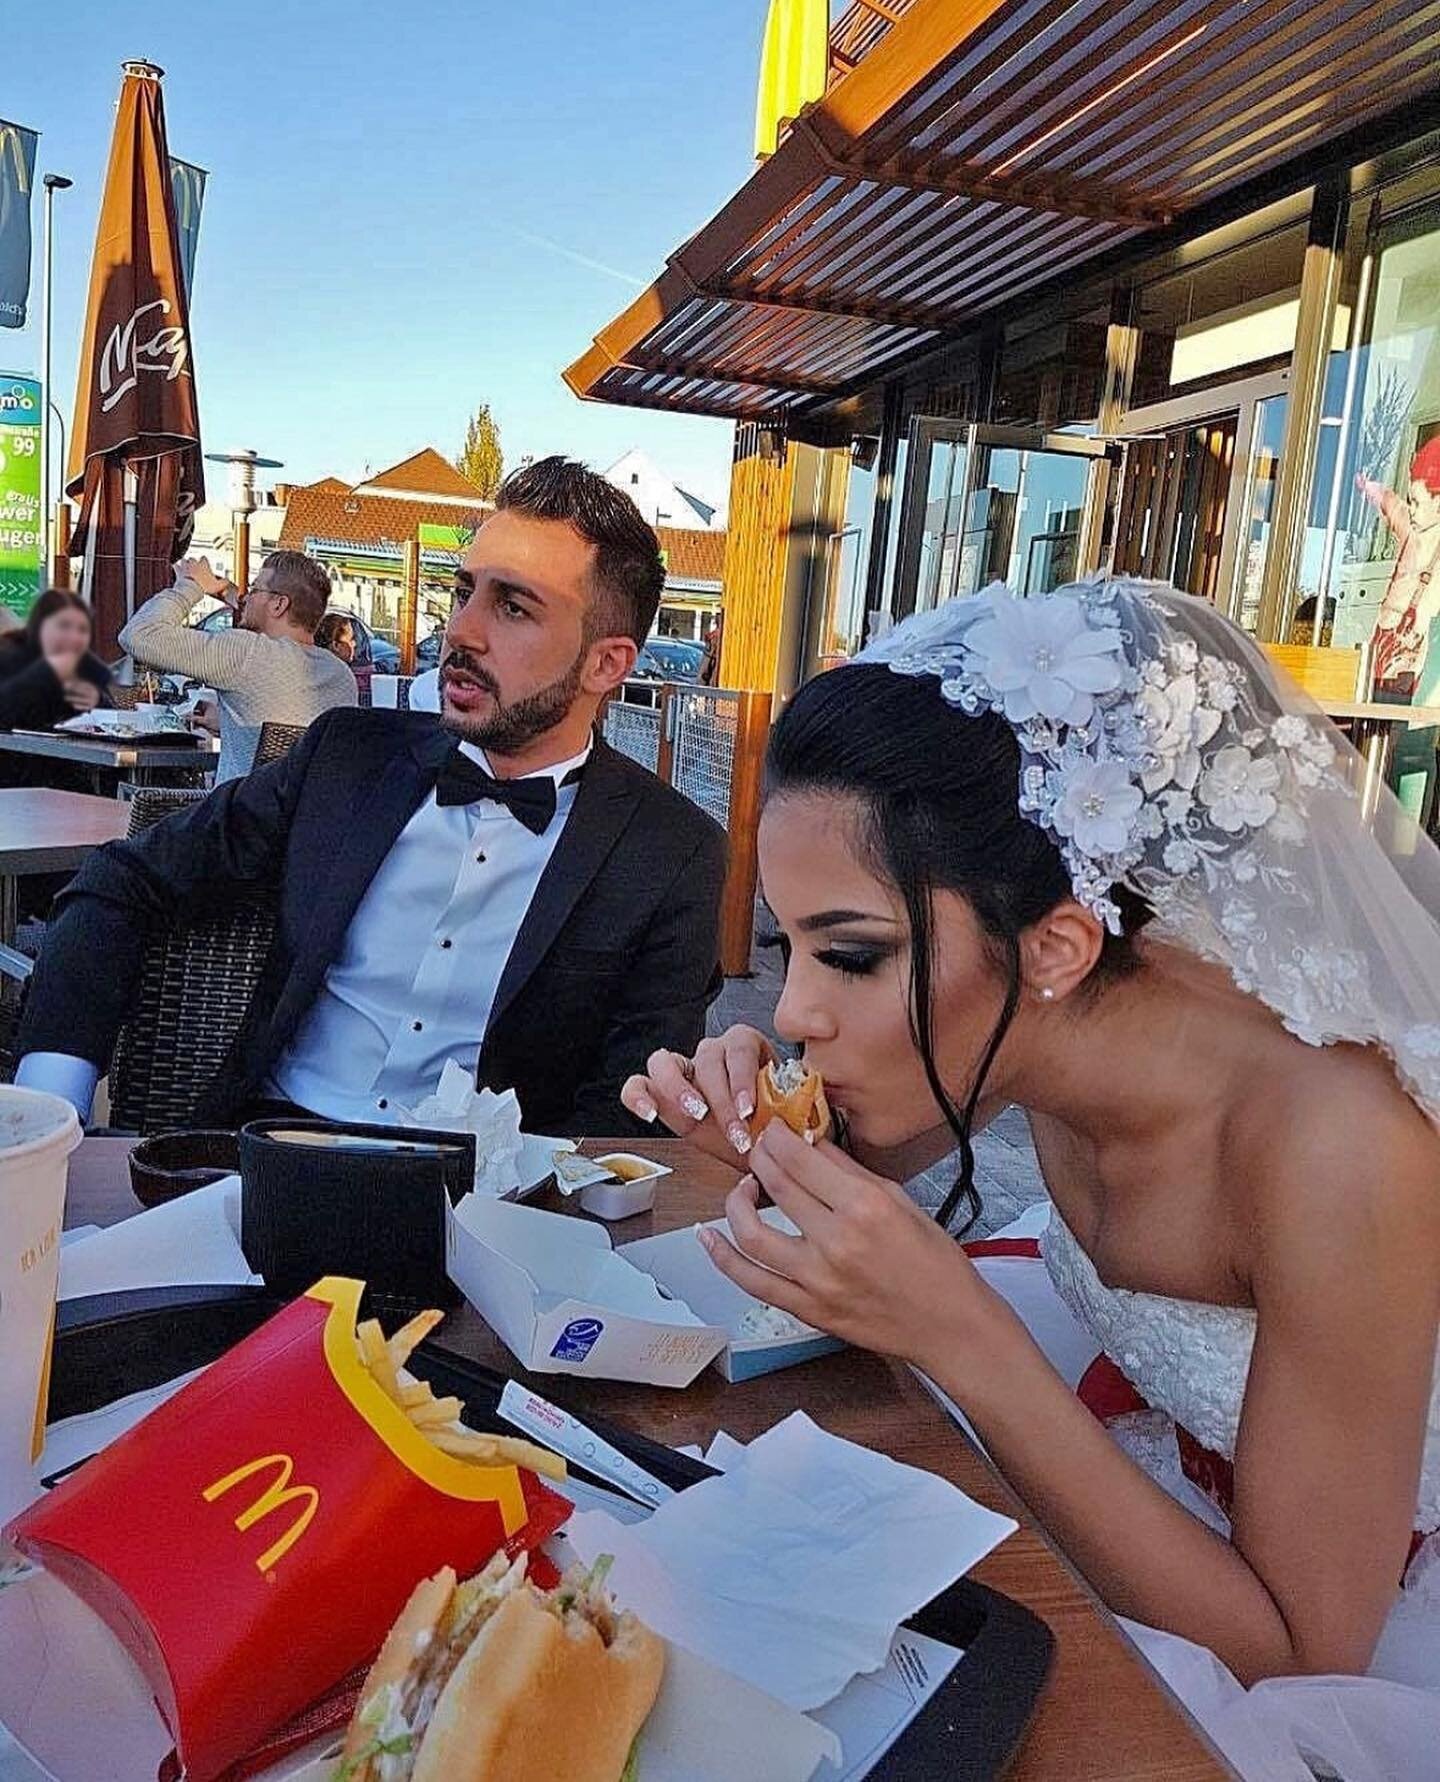 Anybody else feeling this right now?👀

What better way to de-stress after all that planning than a good burger and fries??

What would be your go-to after wedding meal? Tell us in the comments!